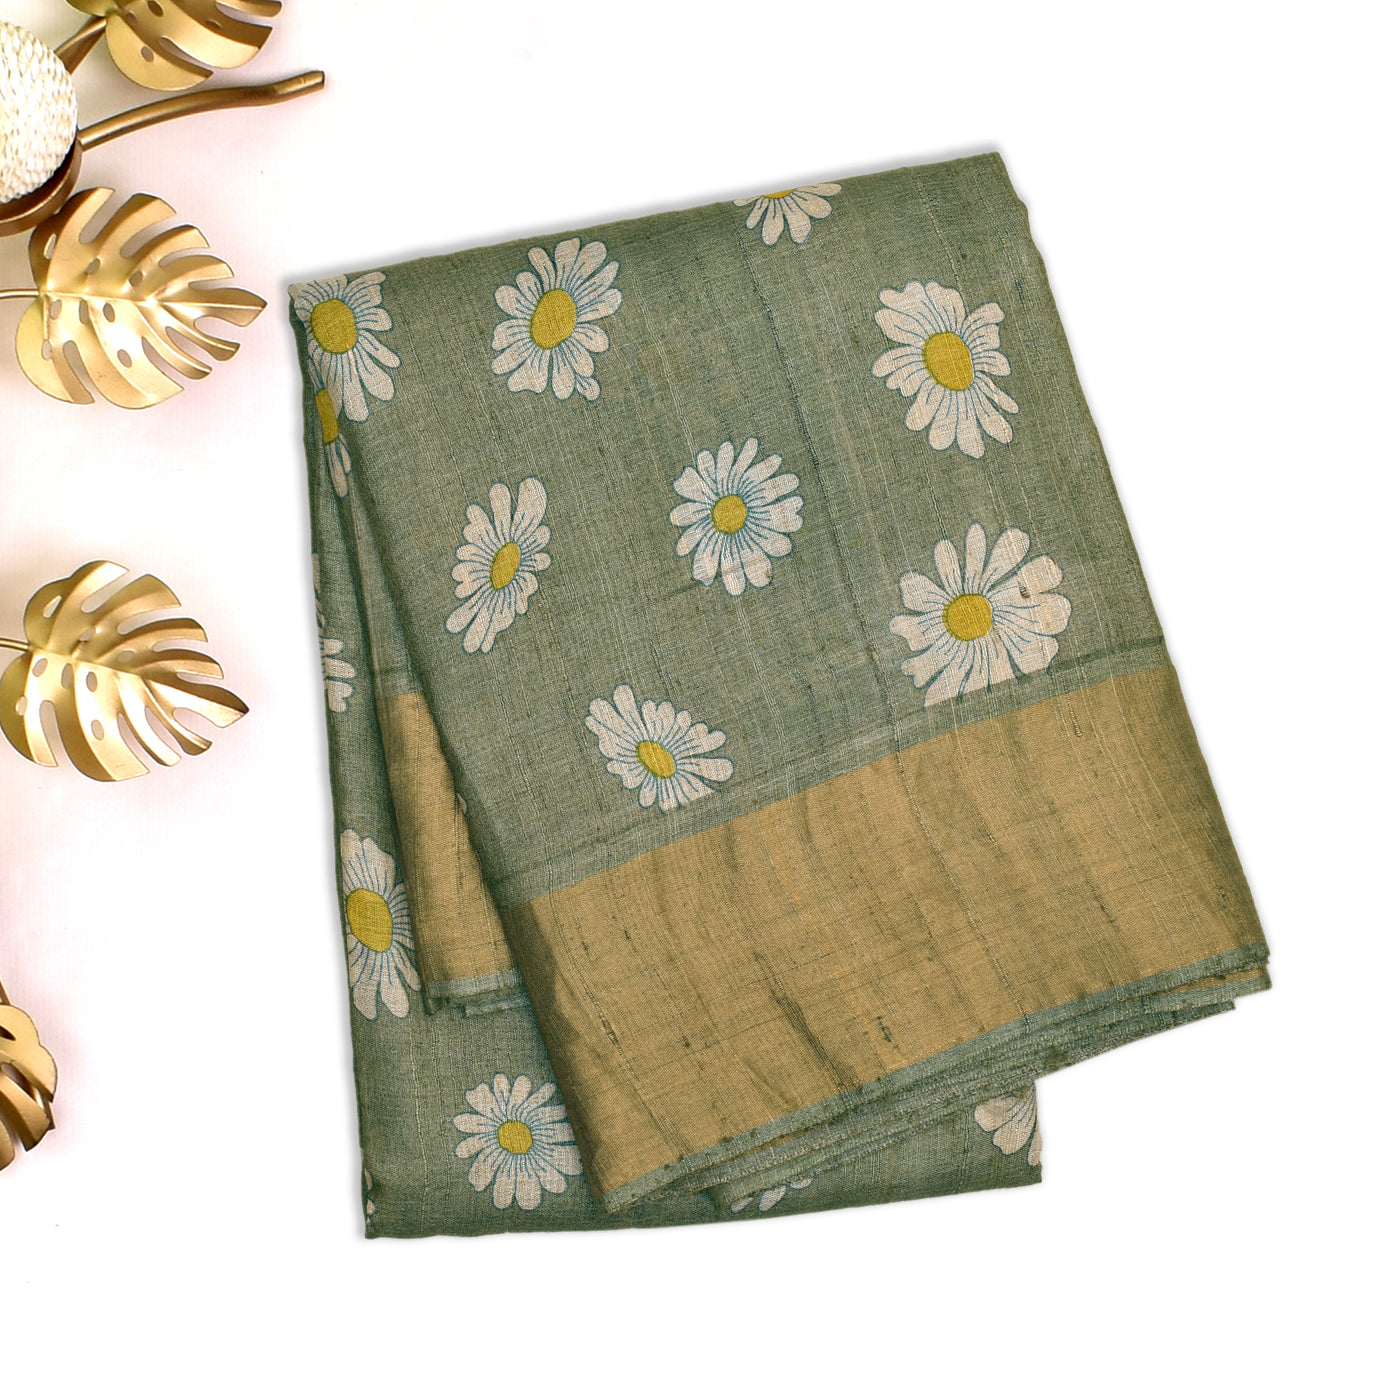 Olive Green Tussar Silk Saree with Floral Printed Design